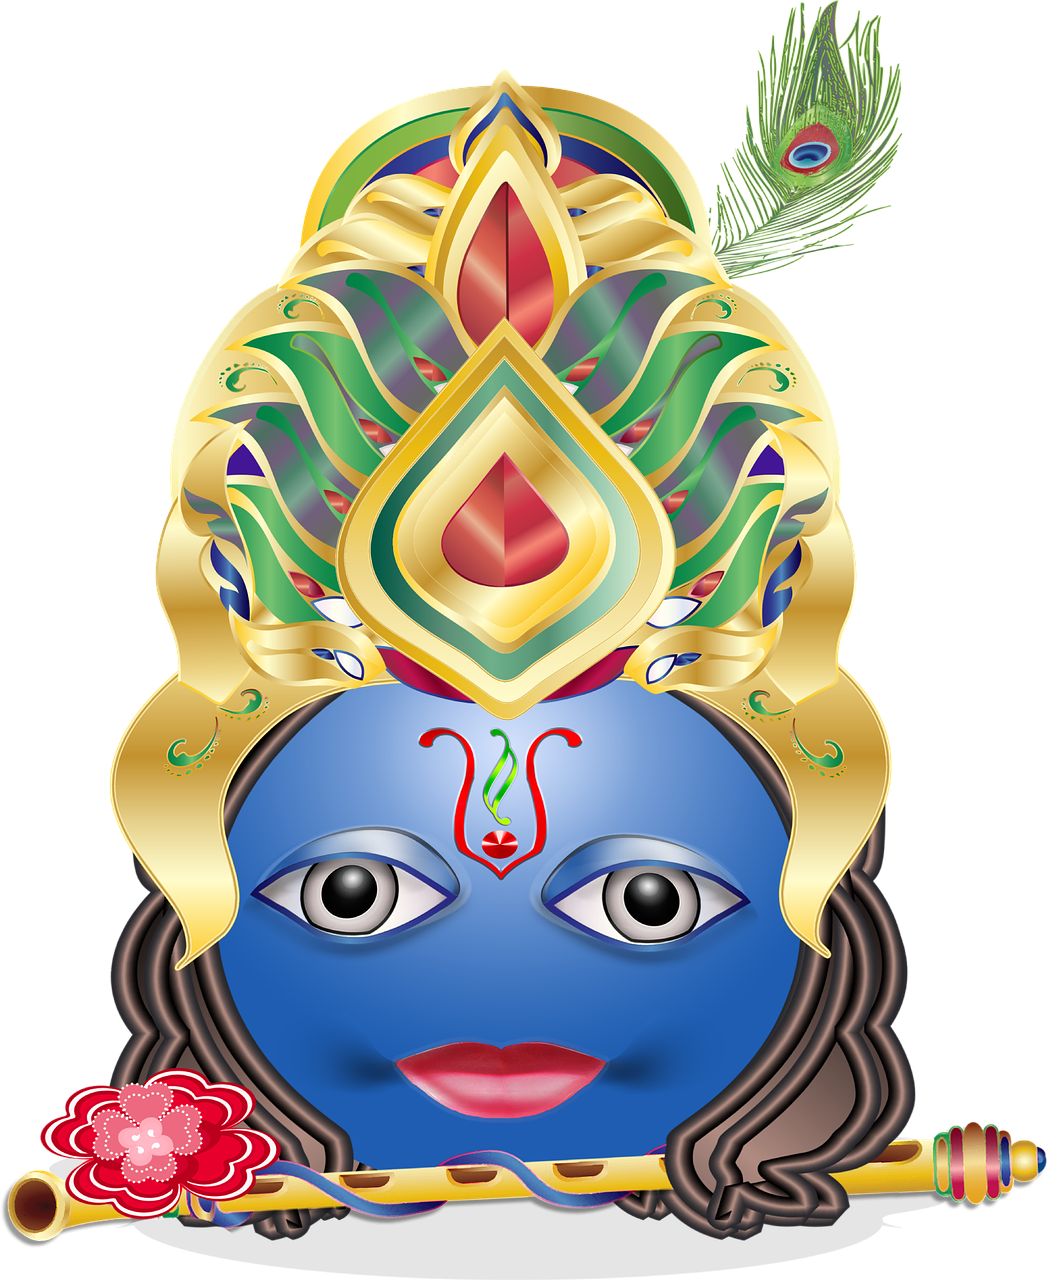 A Blue Face With A Gold Crown And A Flower